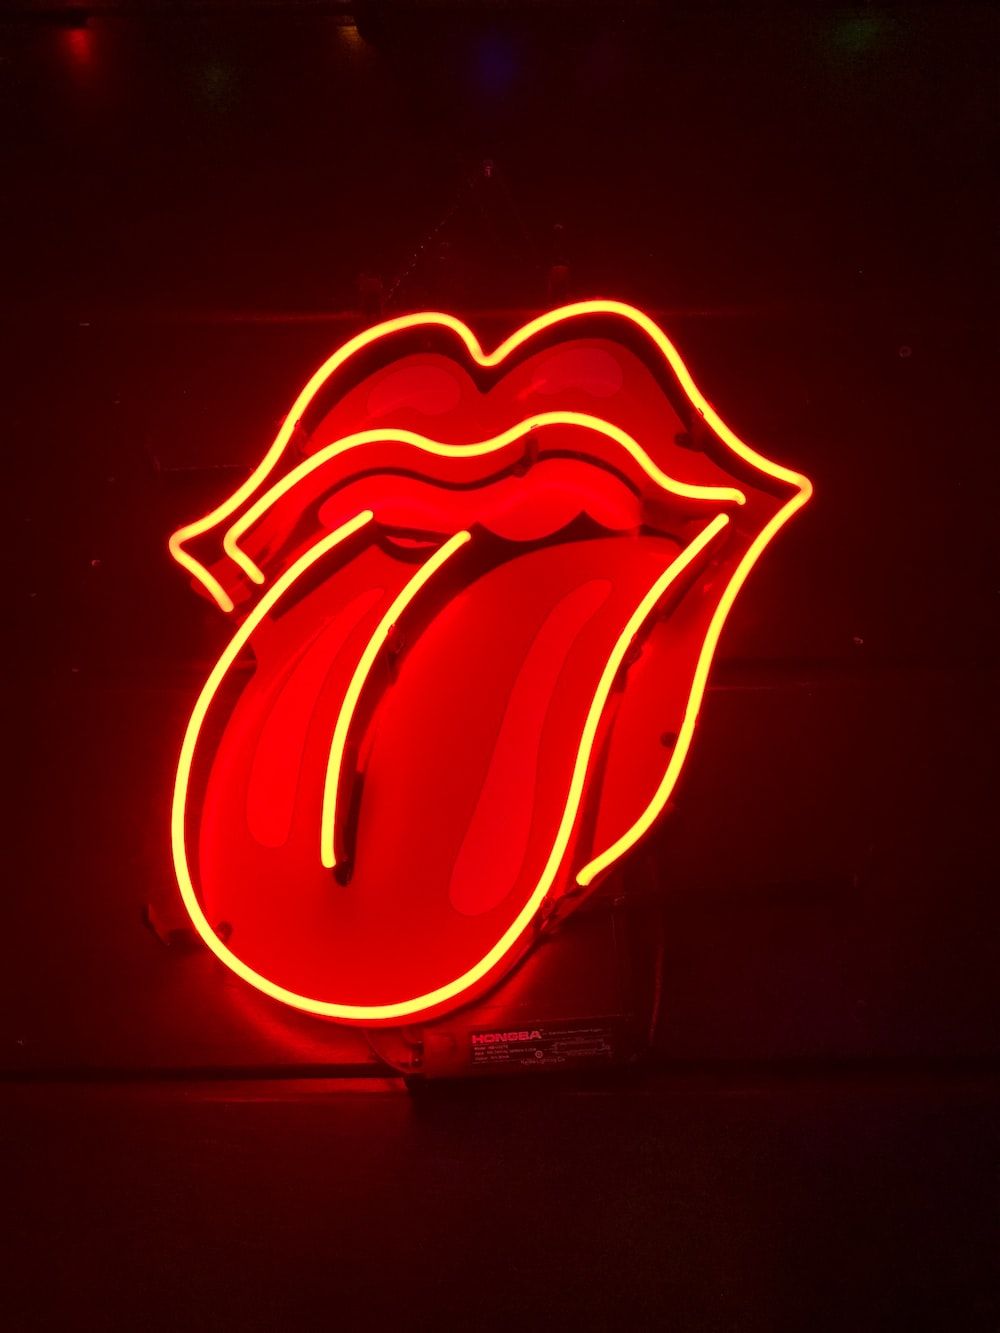 A red neon sign of the rolling stones logo - Light red, neon red